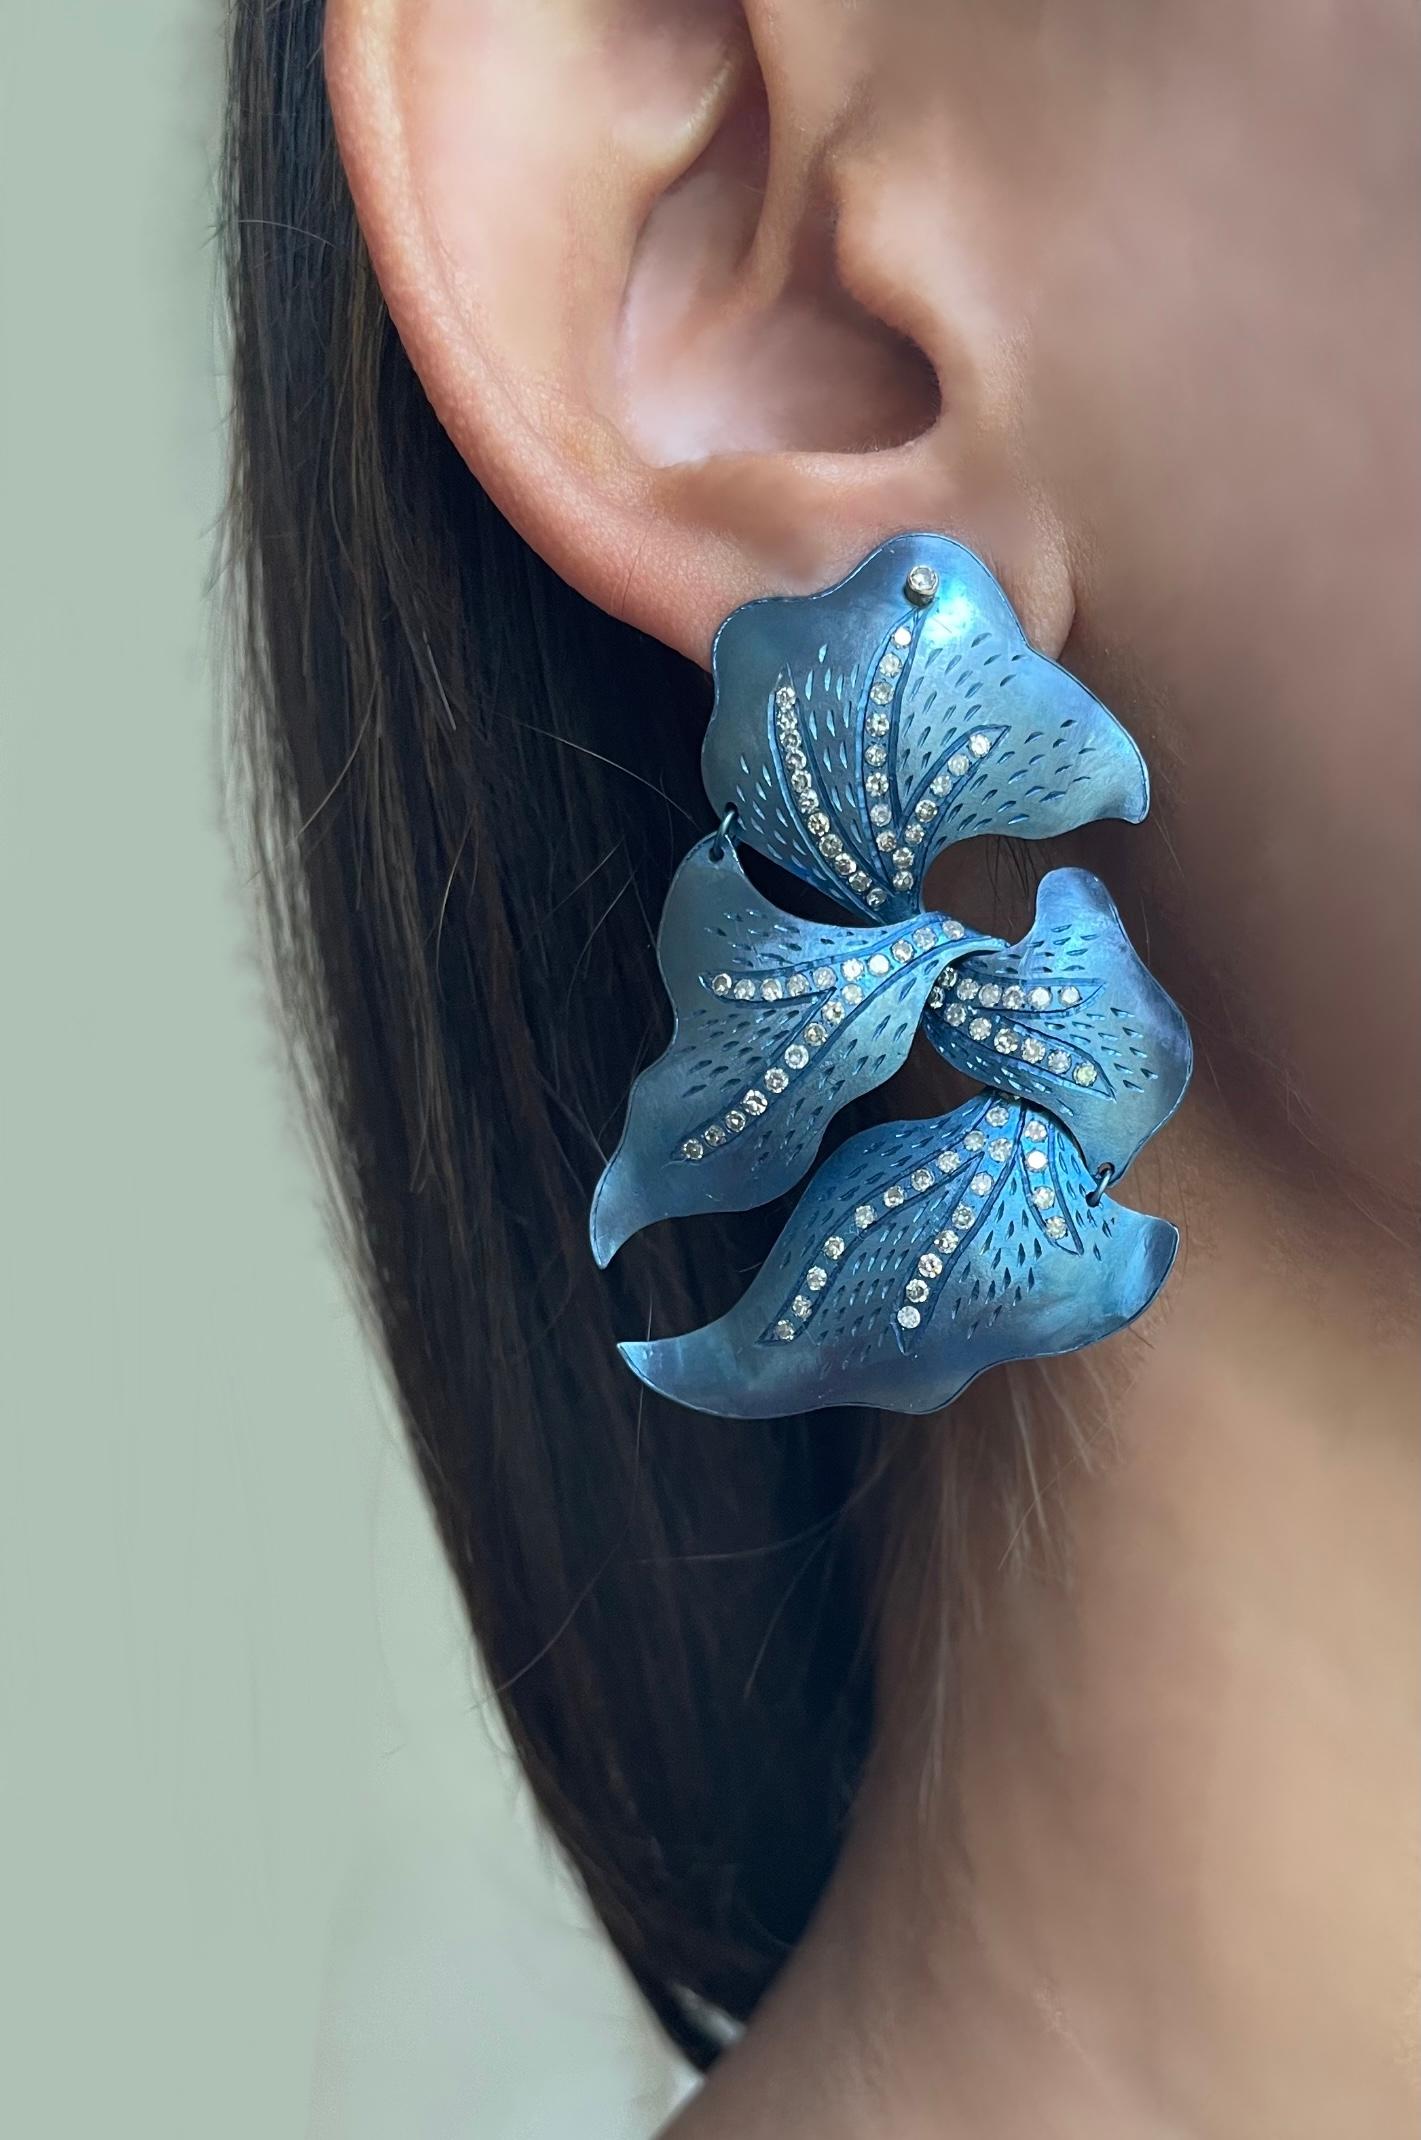 Handcrafted blue twisted titanium earrings with diamonds and 18k gold backs. 

2.17 carats of diamonds. 
18kt Gold backs

